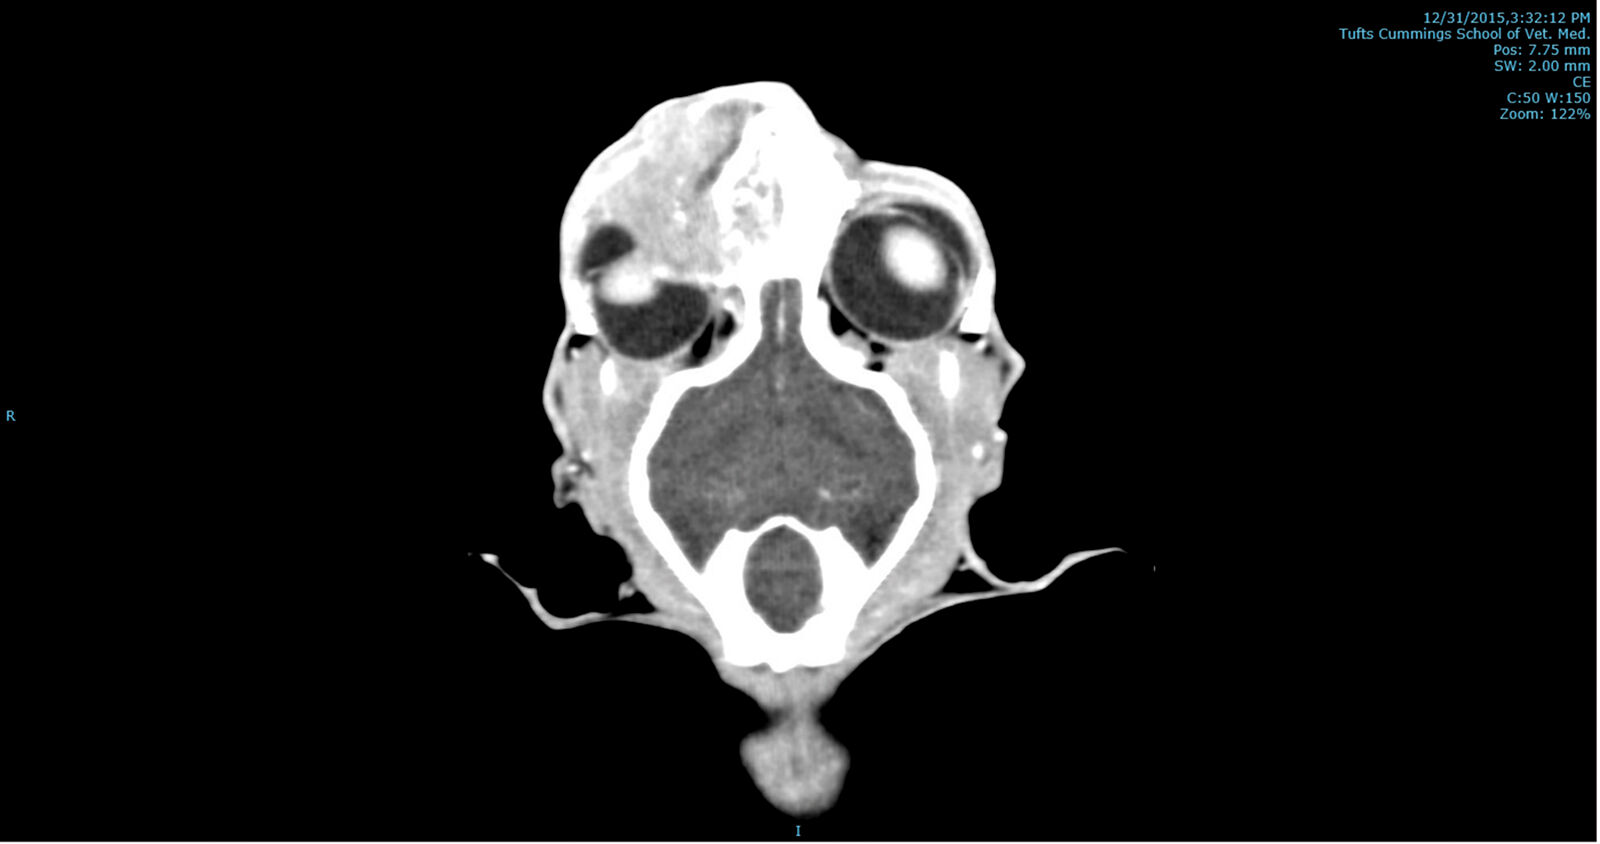 Figure 4. A CT image of the cat shown in Figure 2, documenting a mass lesion.